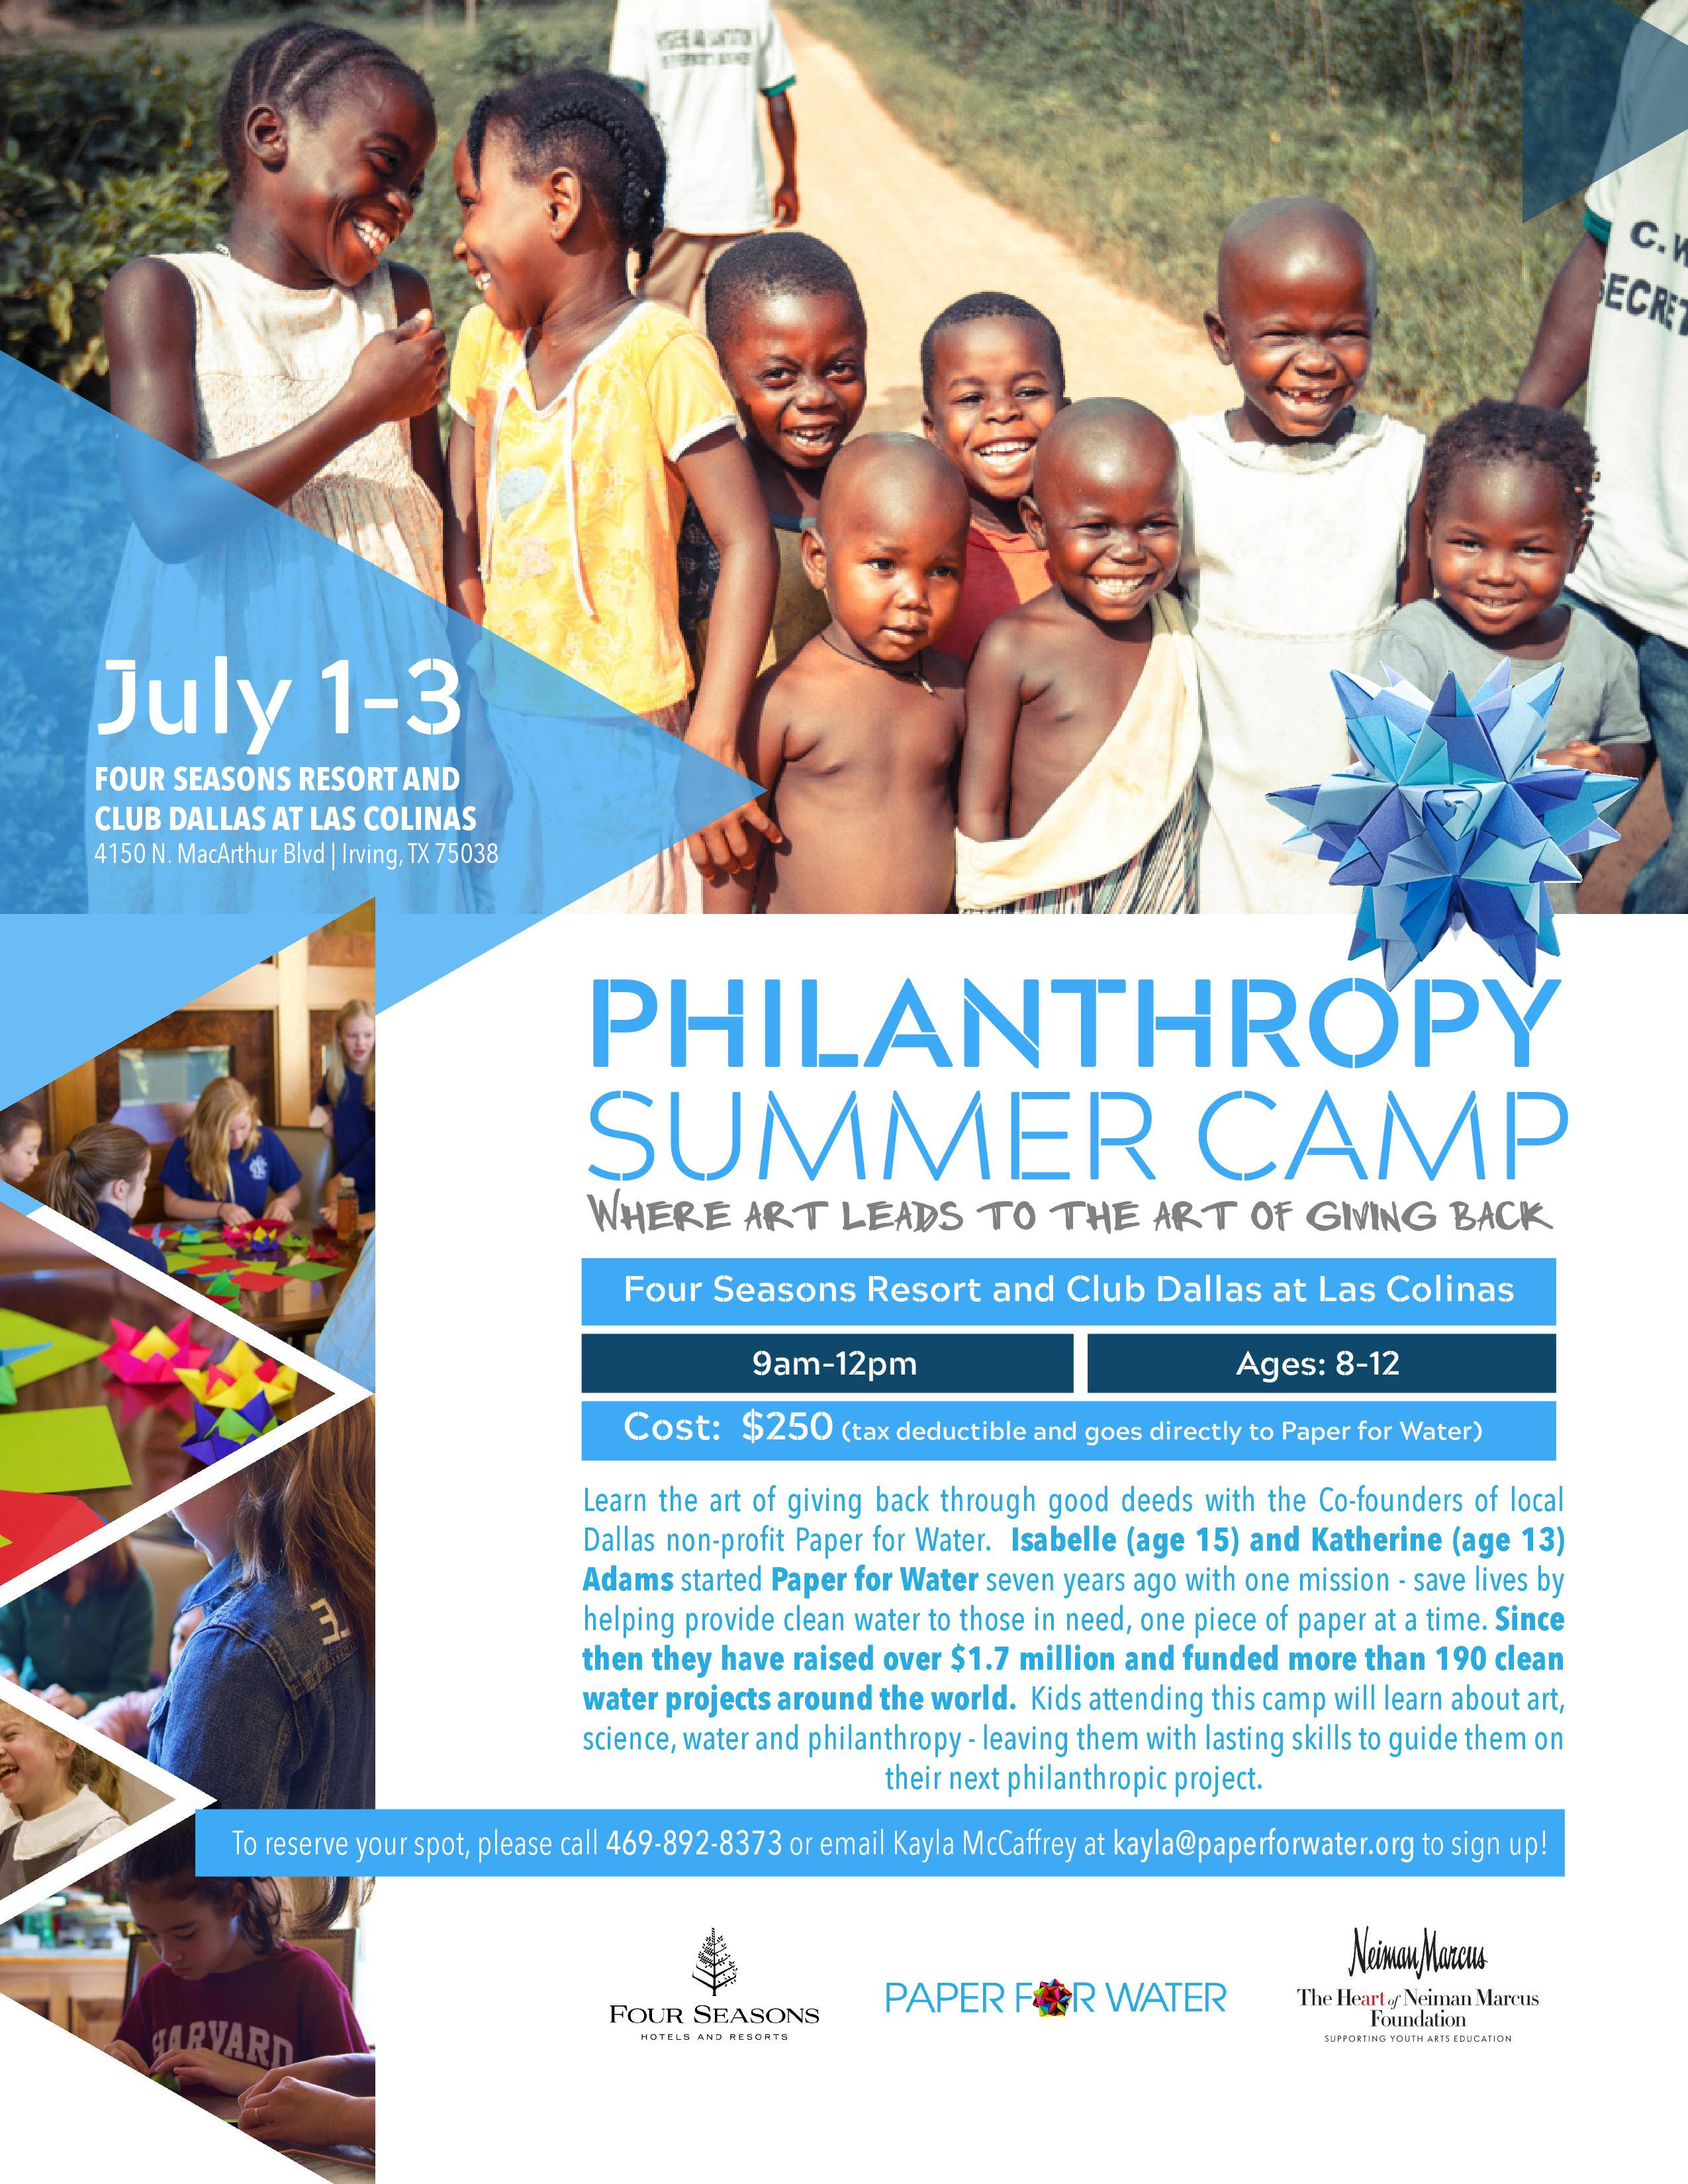 Paper for water philanthropy summer camp